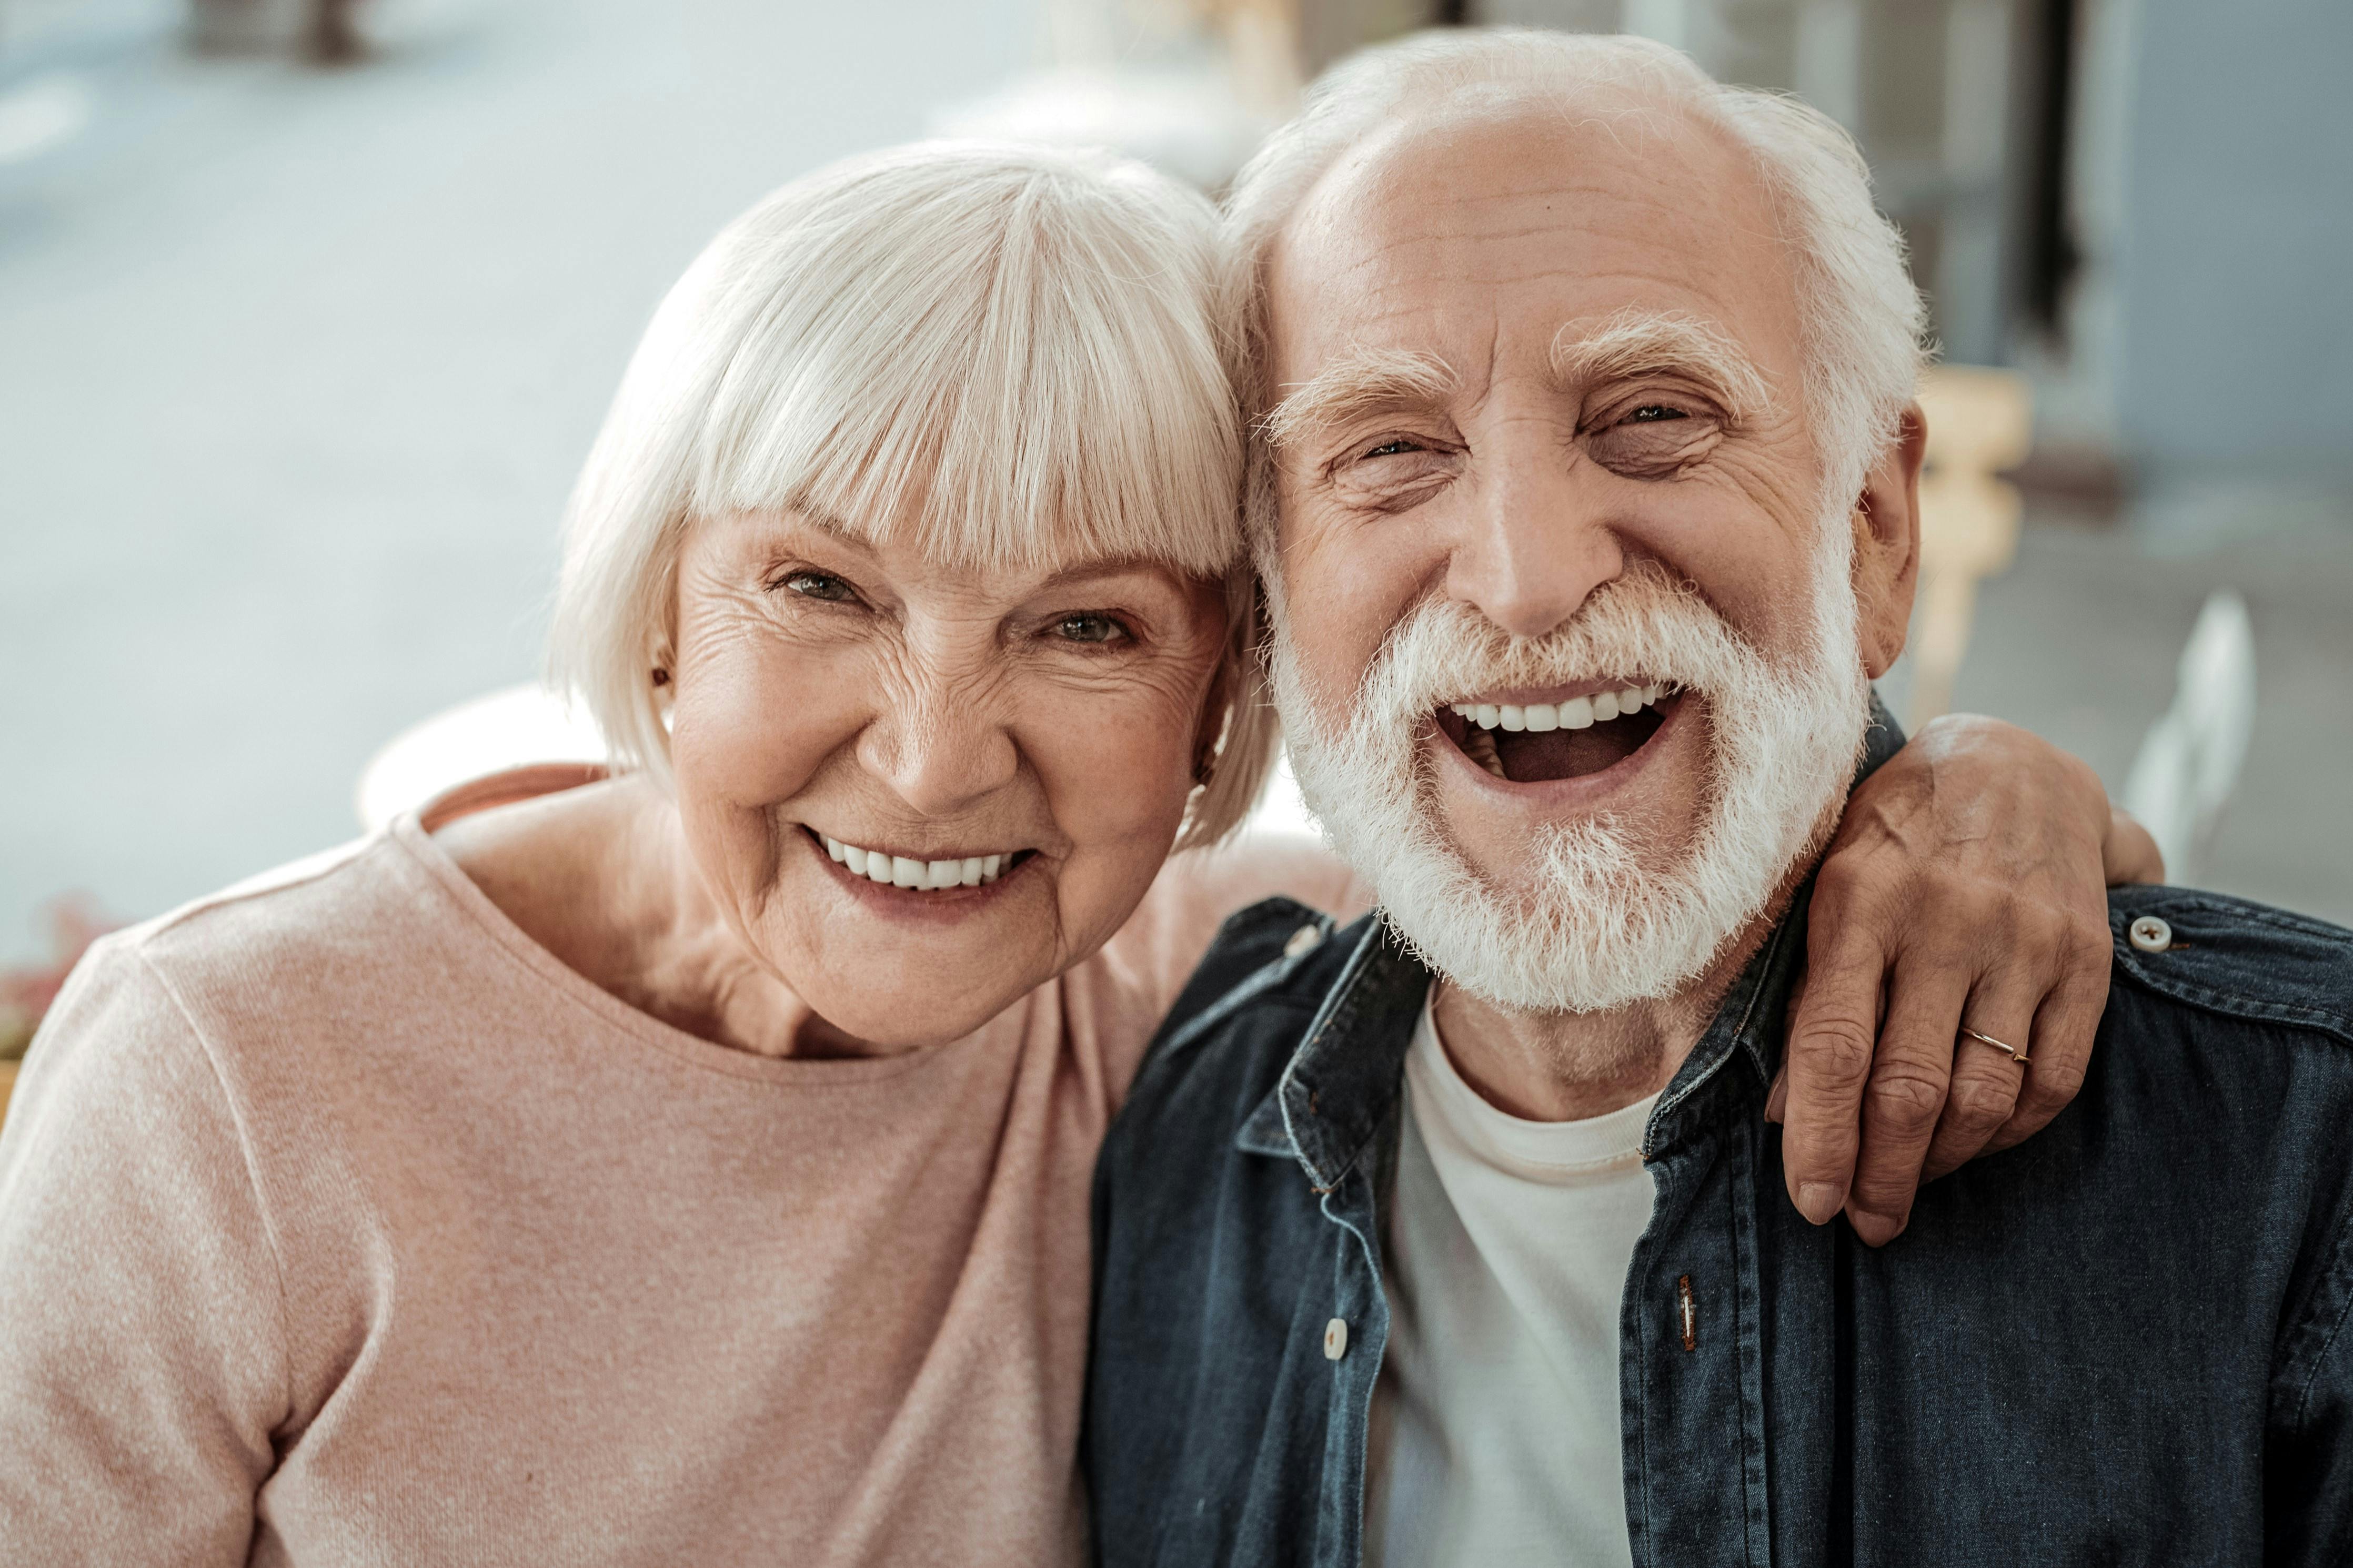 An attractive, elderly heterosexual couple lean their heads together as they smile joyfully into the camera.